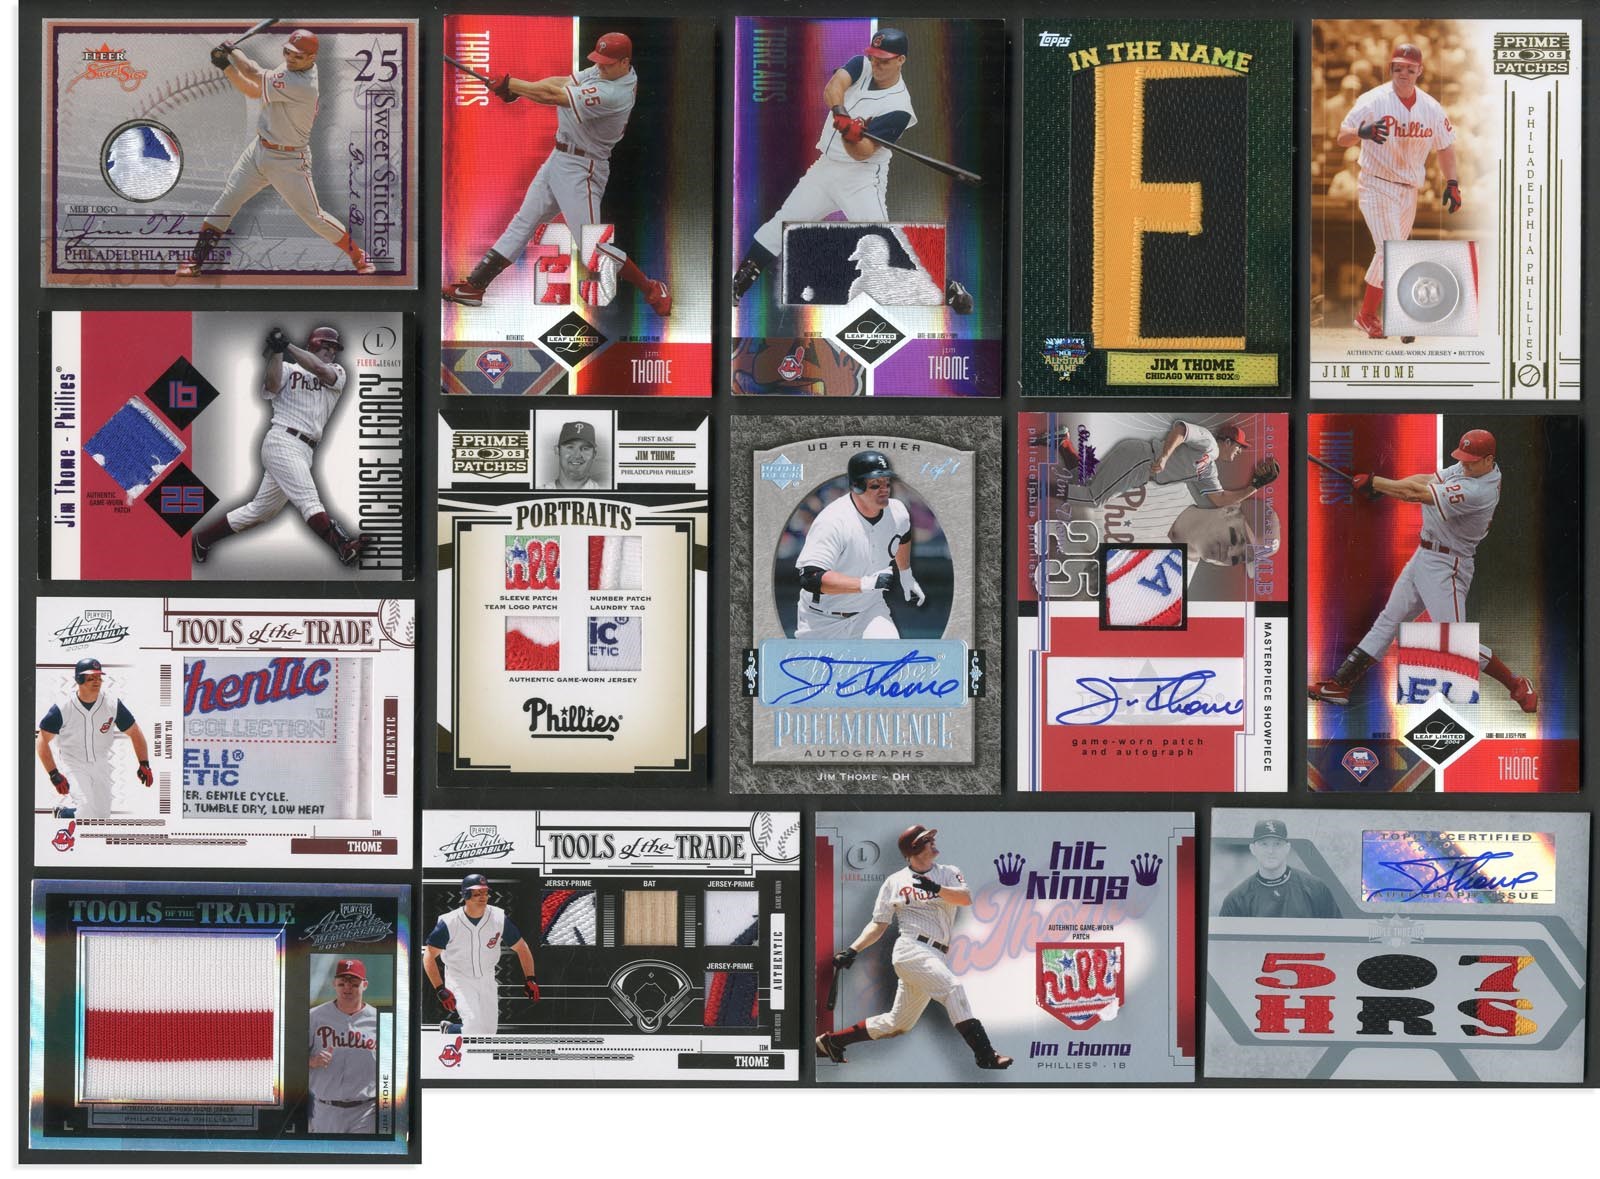 Spectacular Jim Thome "1 of 1" Memorabilia & Autograph Collection (48)